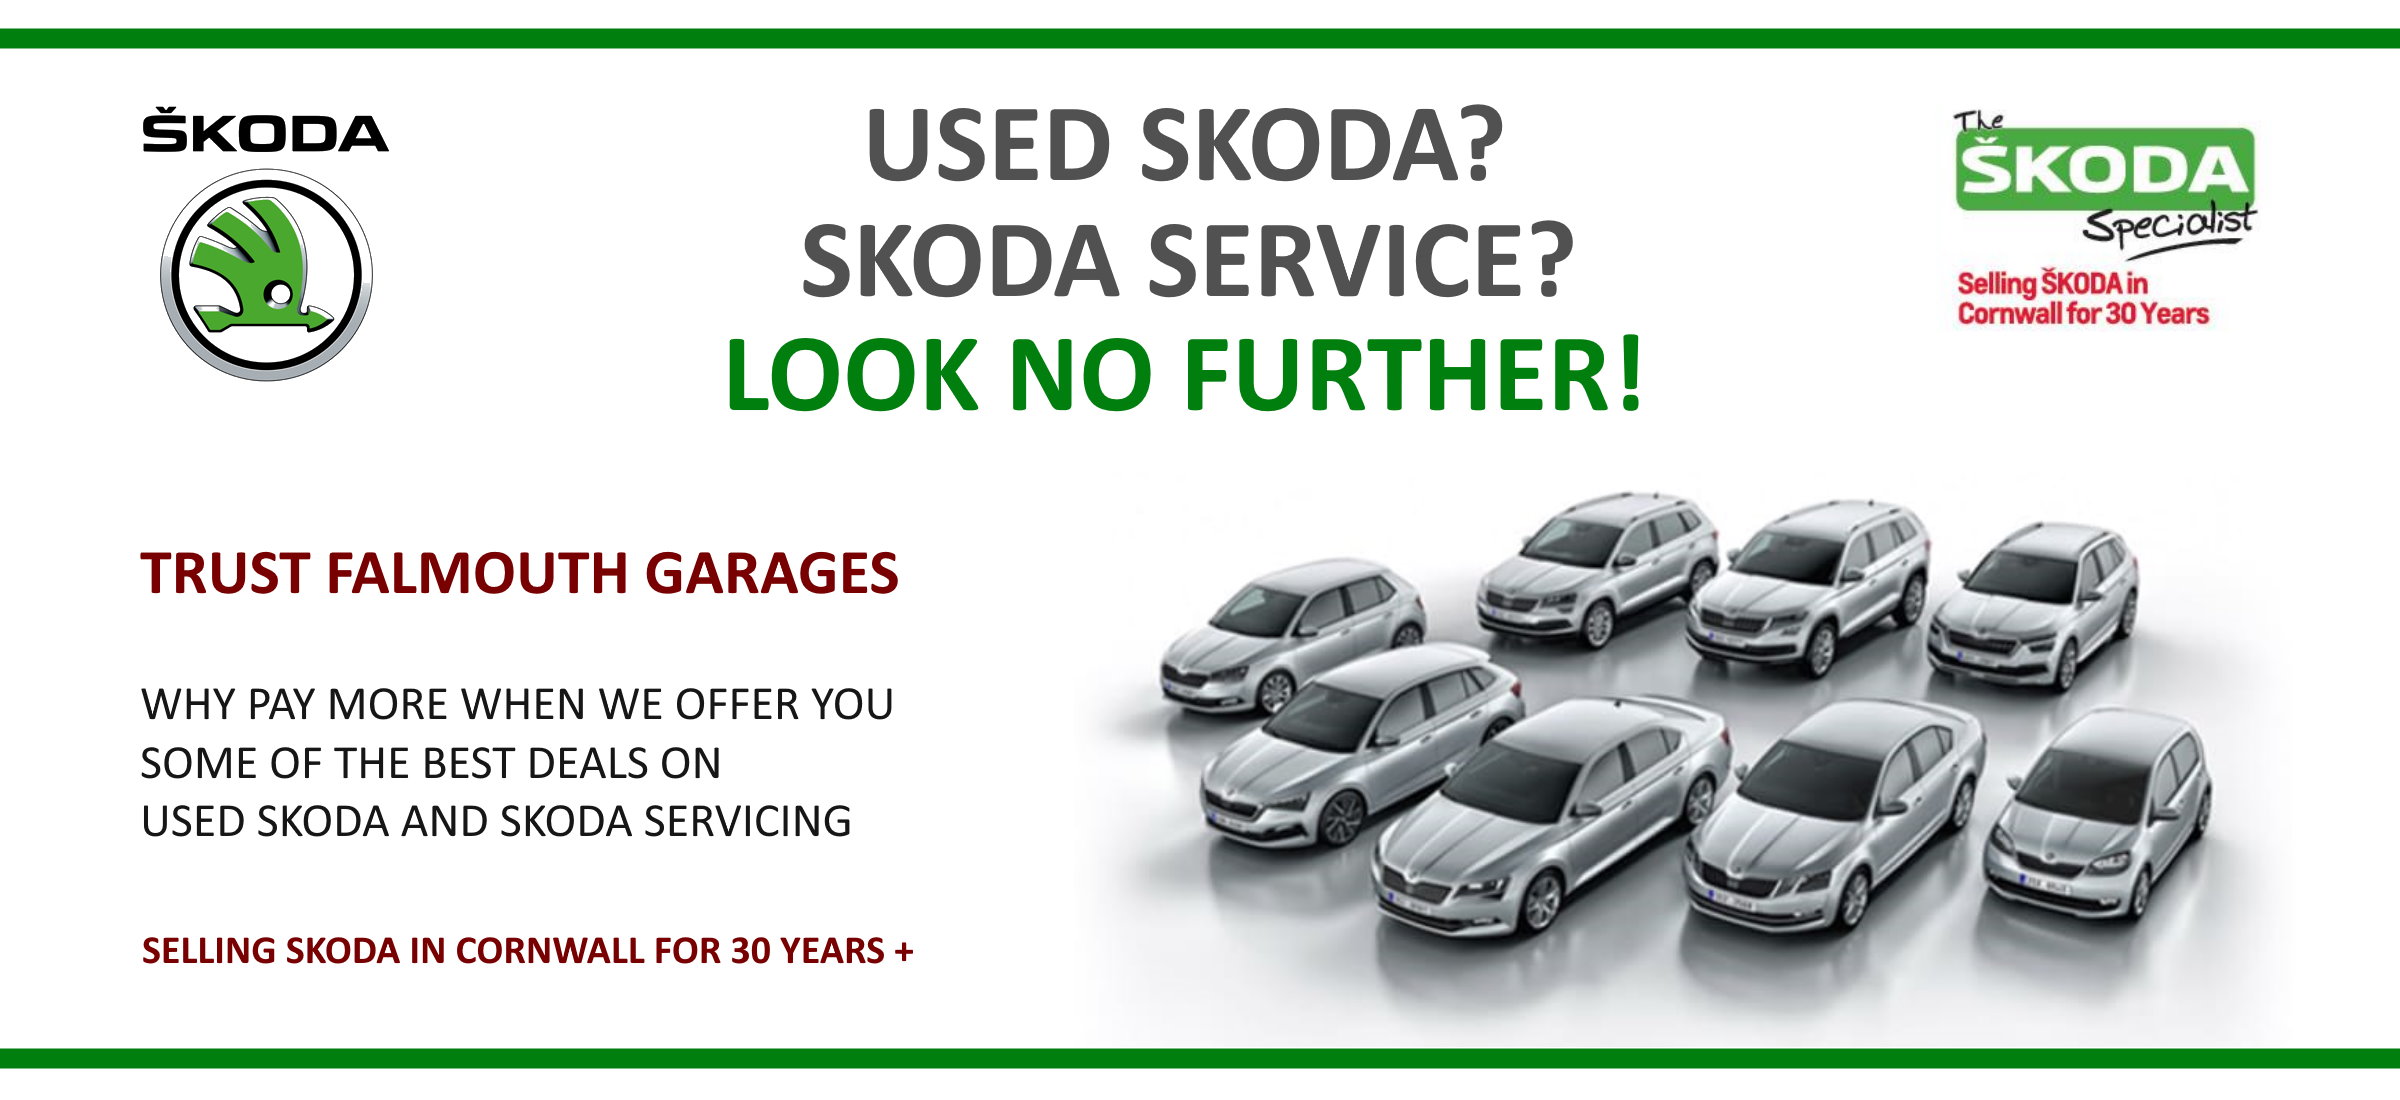 Great deals on used Skoda's from Falmouth Garages